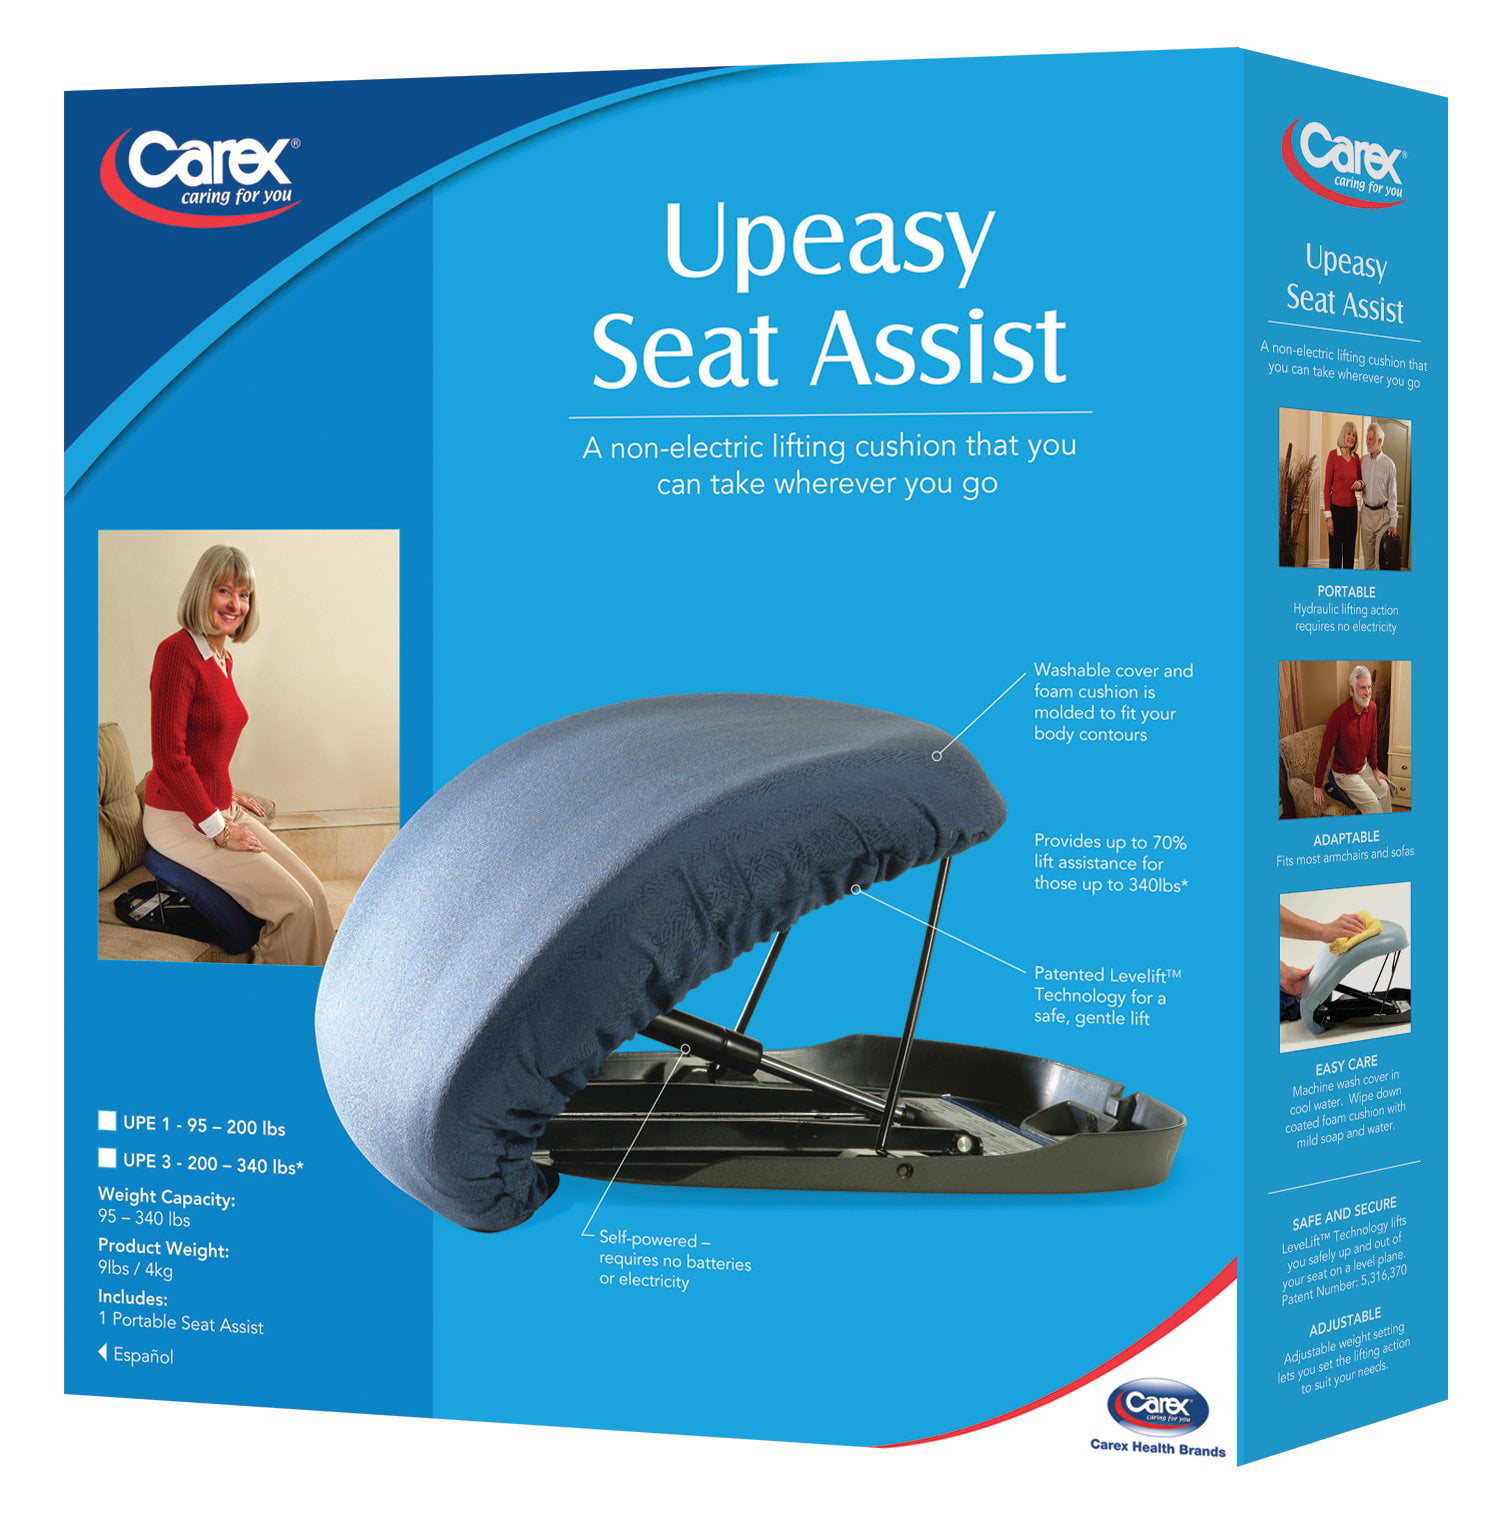 Carex Upeasy Seat Assist - Chair Lift And Sofa Stand Assist - Portable Lifting  Seat With Support Up to 220 Pounds, Provides 70% Assistance 